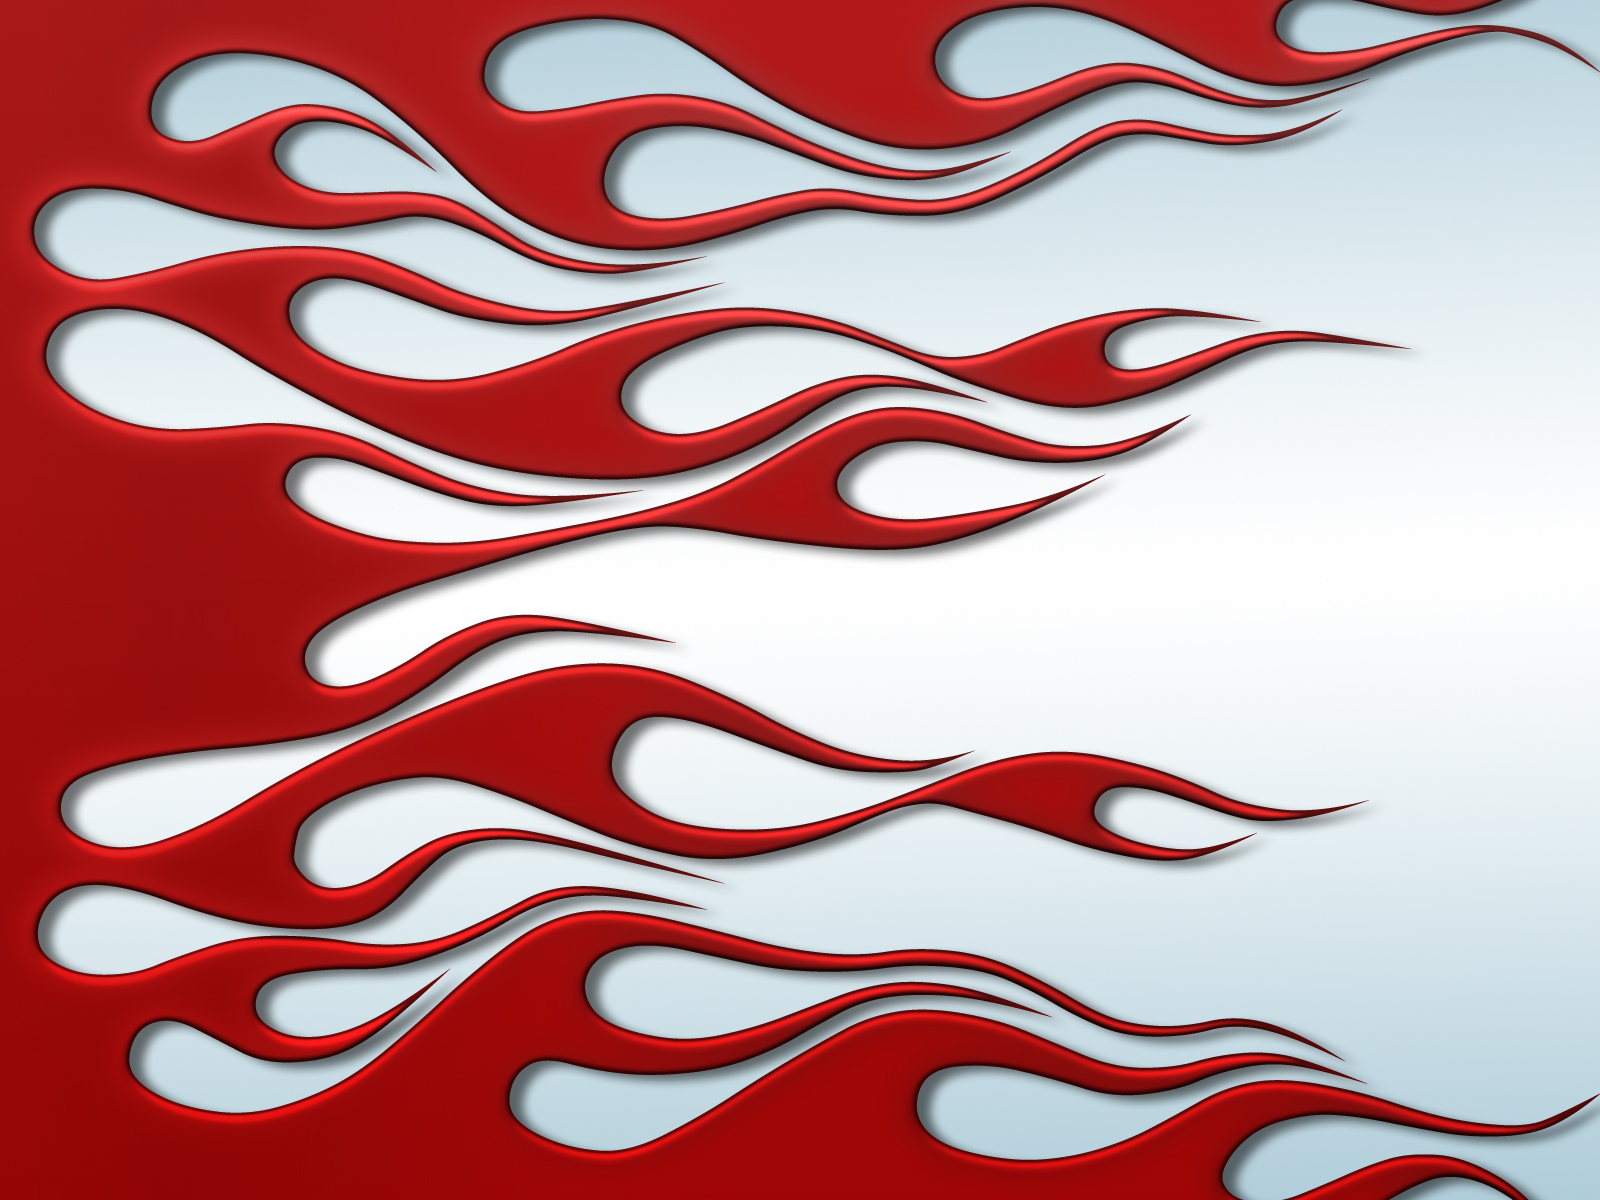 Flames Red On White By Jbensch